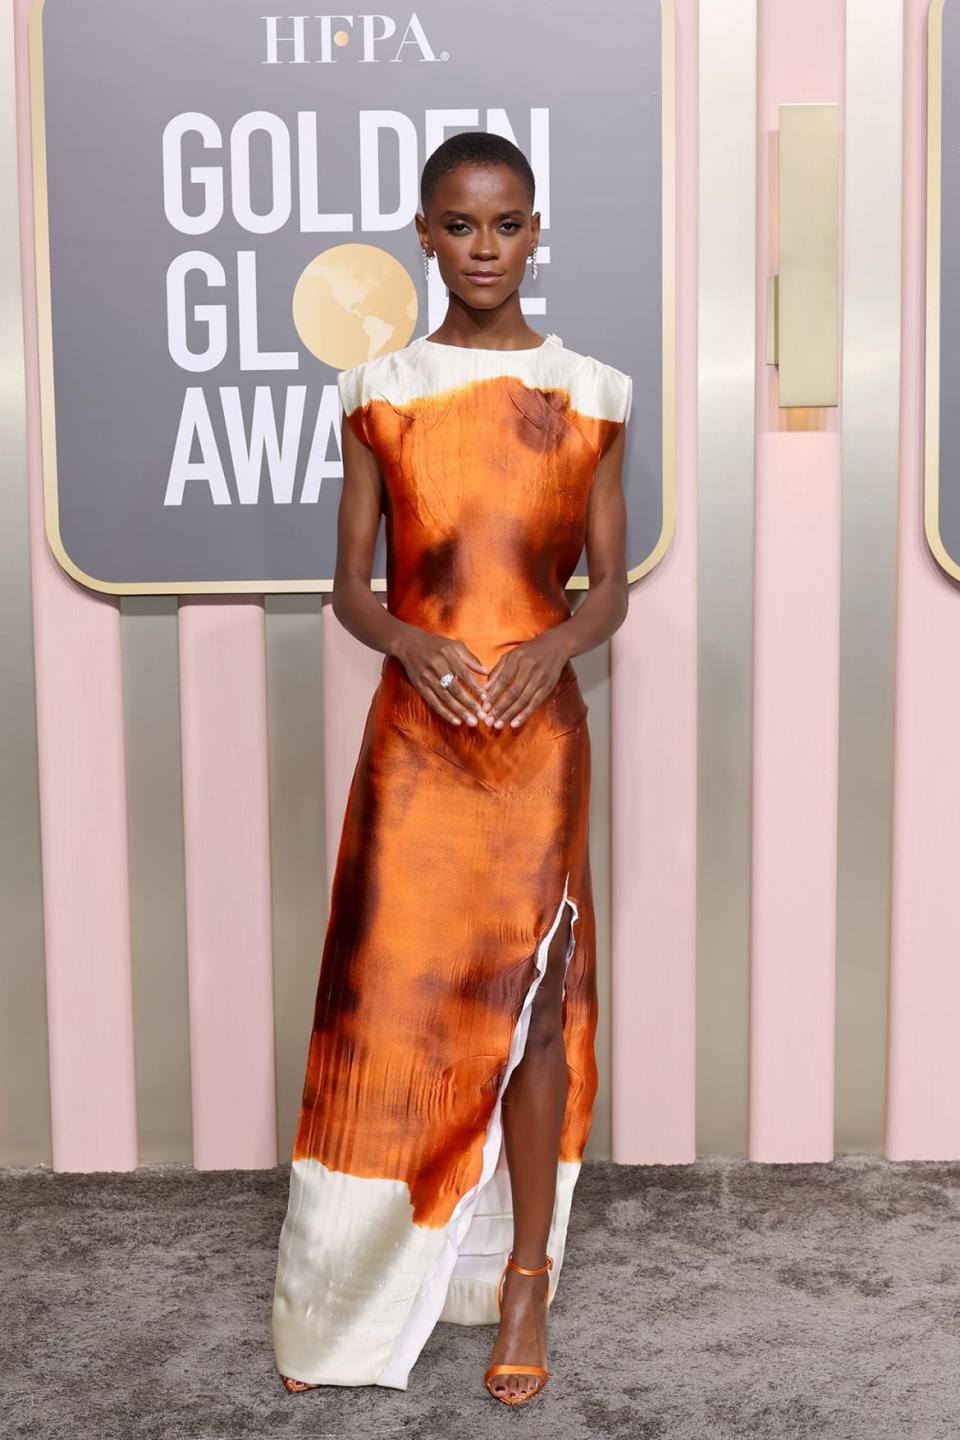 <div class="inline-image__caption"><p>Letitia Wright attends the 80th Annual Golden Globe Awards at The Beverly Hilton on January 10, 2023 in Beverly Hills, California.</p></div> <div class="inline-image__credit">Amy Sussman/Getty Images</div>